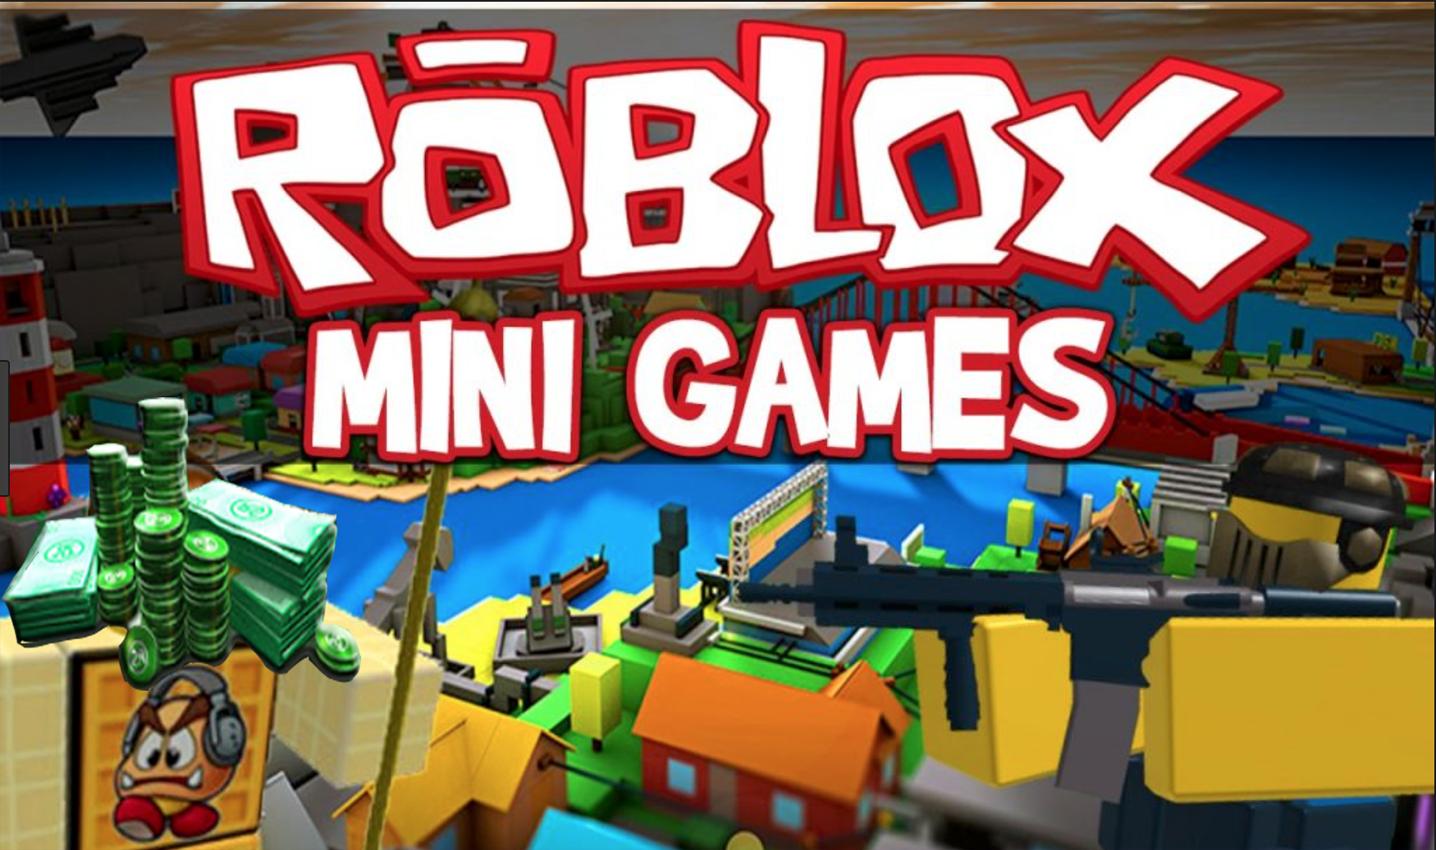 Roblox Hack 2018 The New Method To Get Your Free Robux